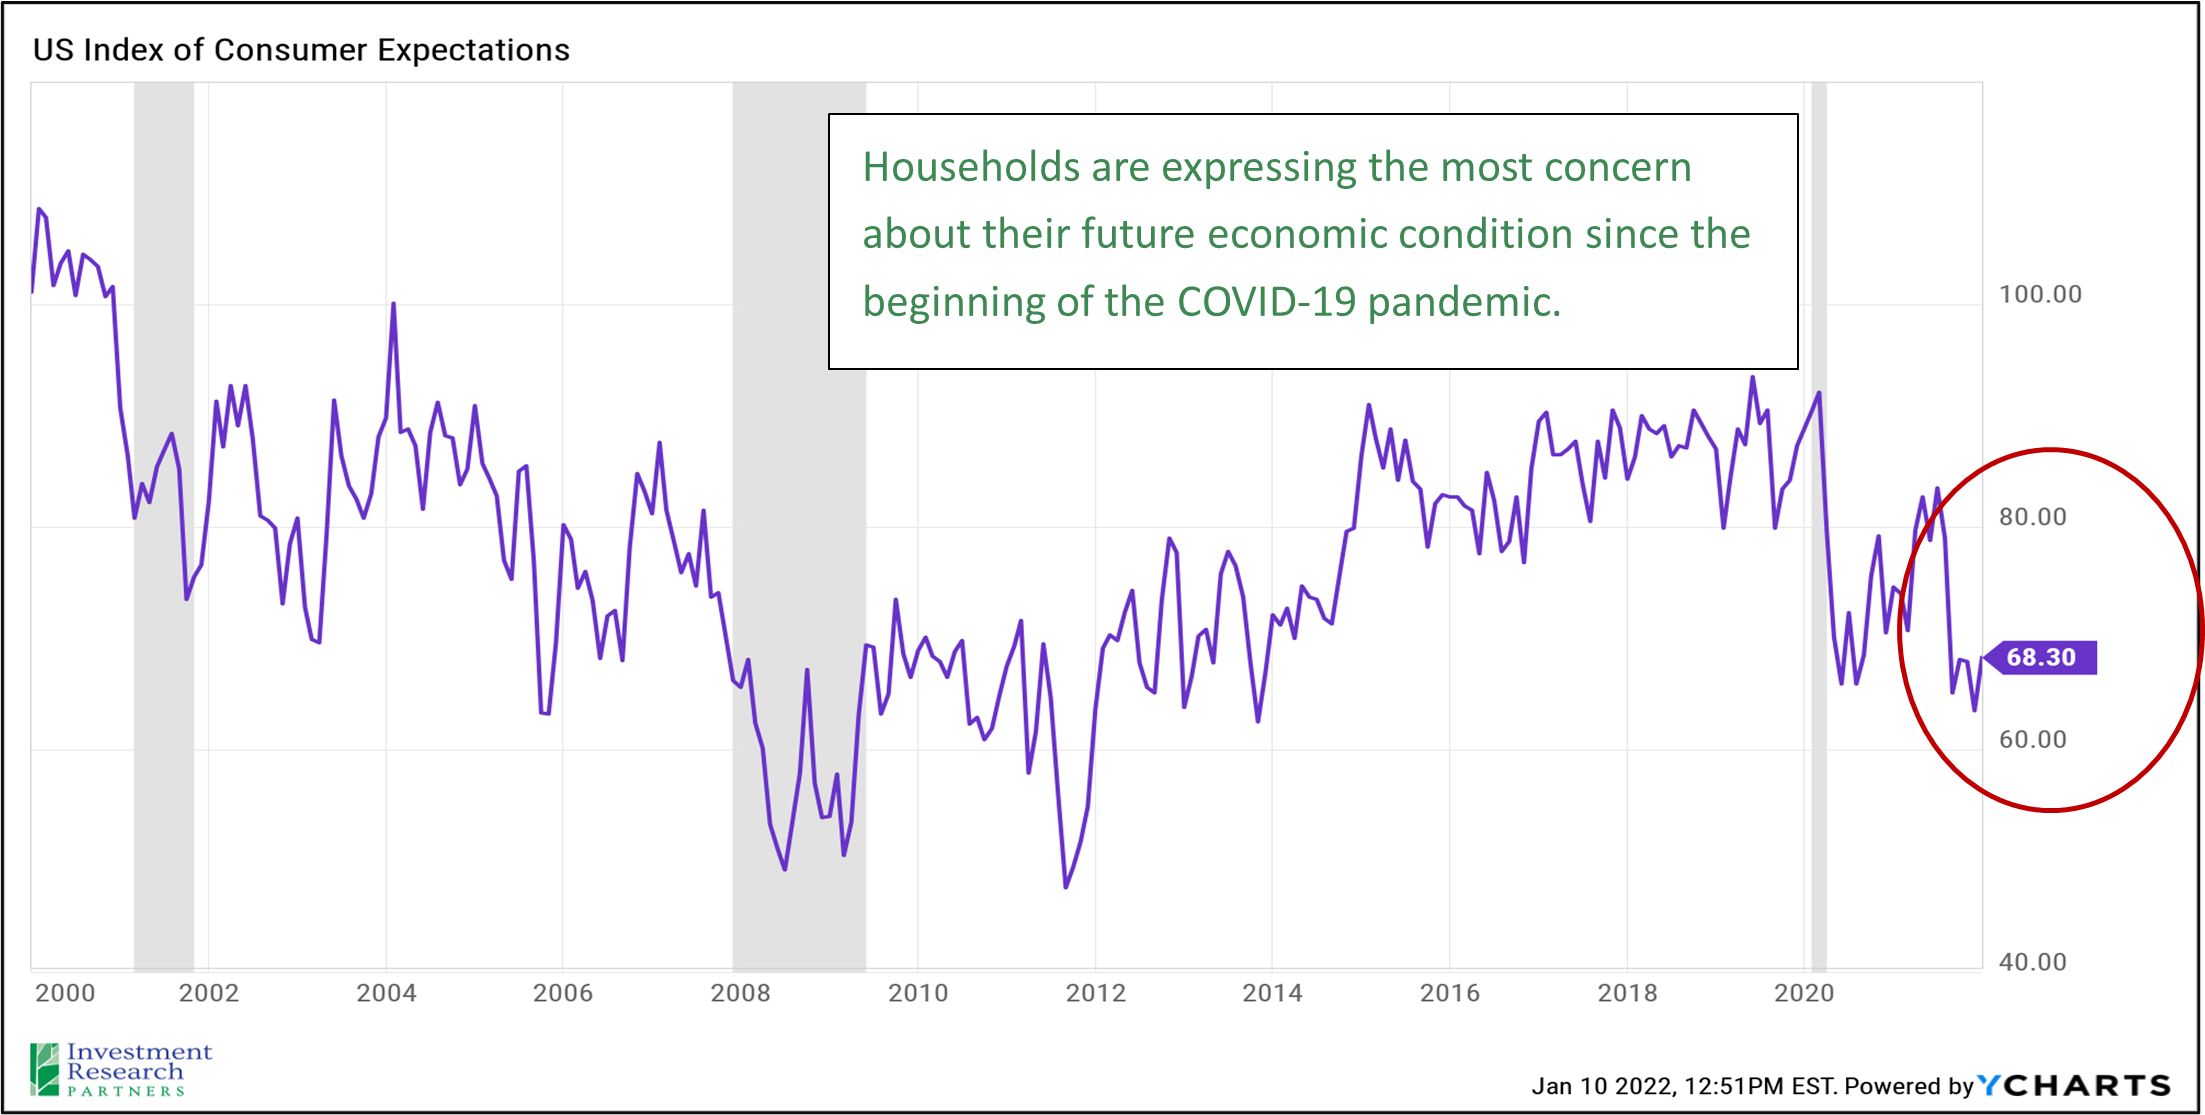 Line graph depicting US Index of Consumer Expectations since 2000 with text reading: Households are expressing the most concern about their future economic condition since the beginning of the COVID-19 pandemic.